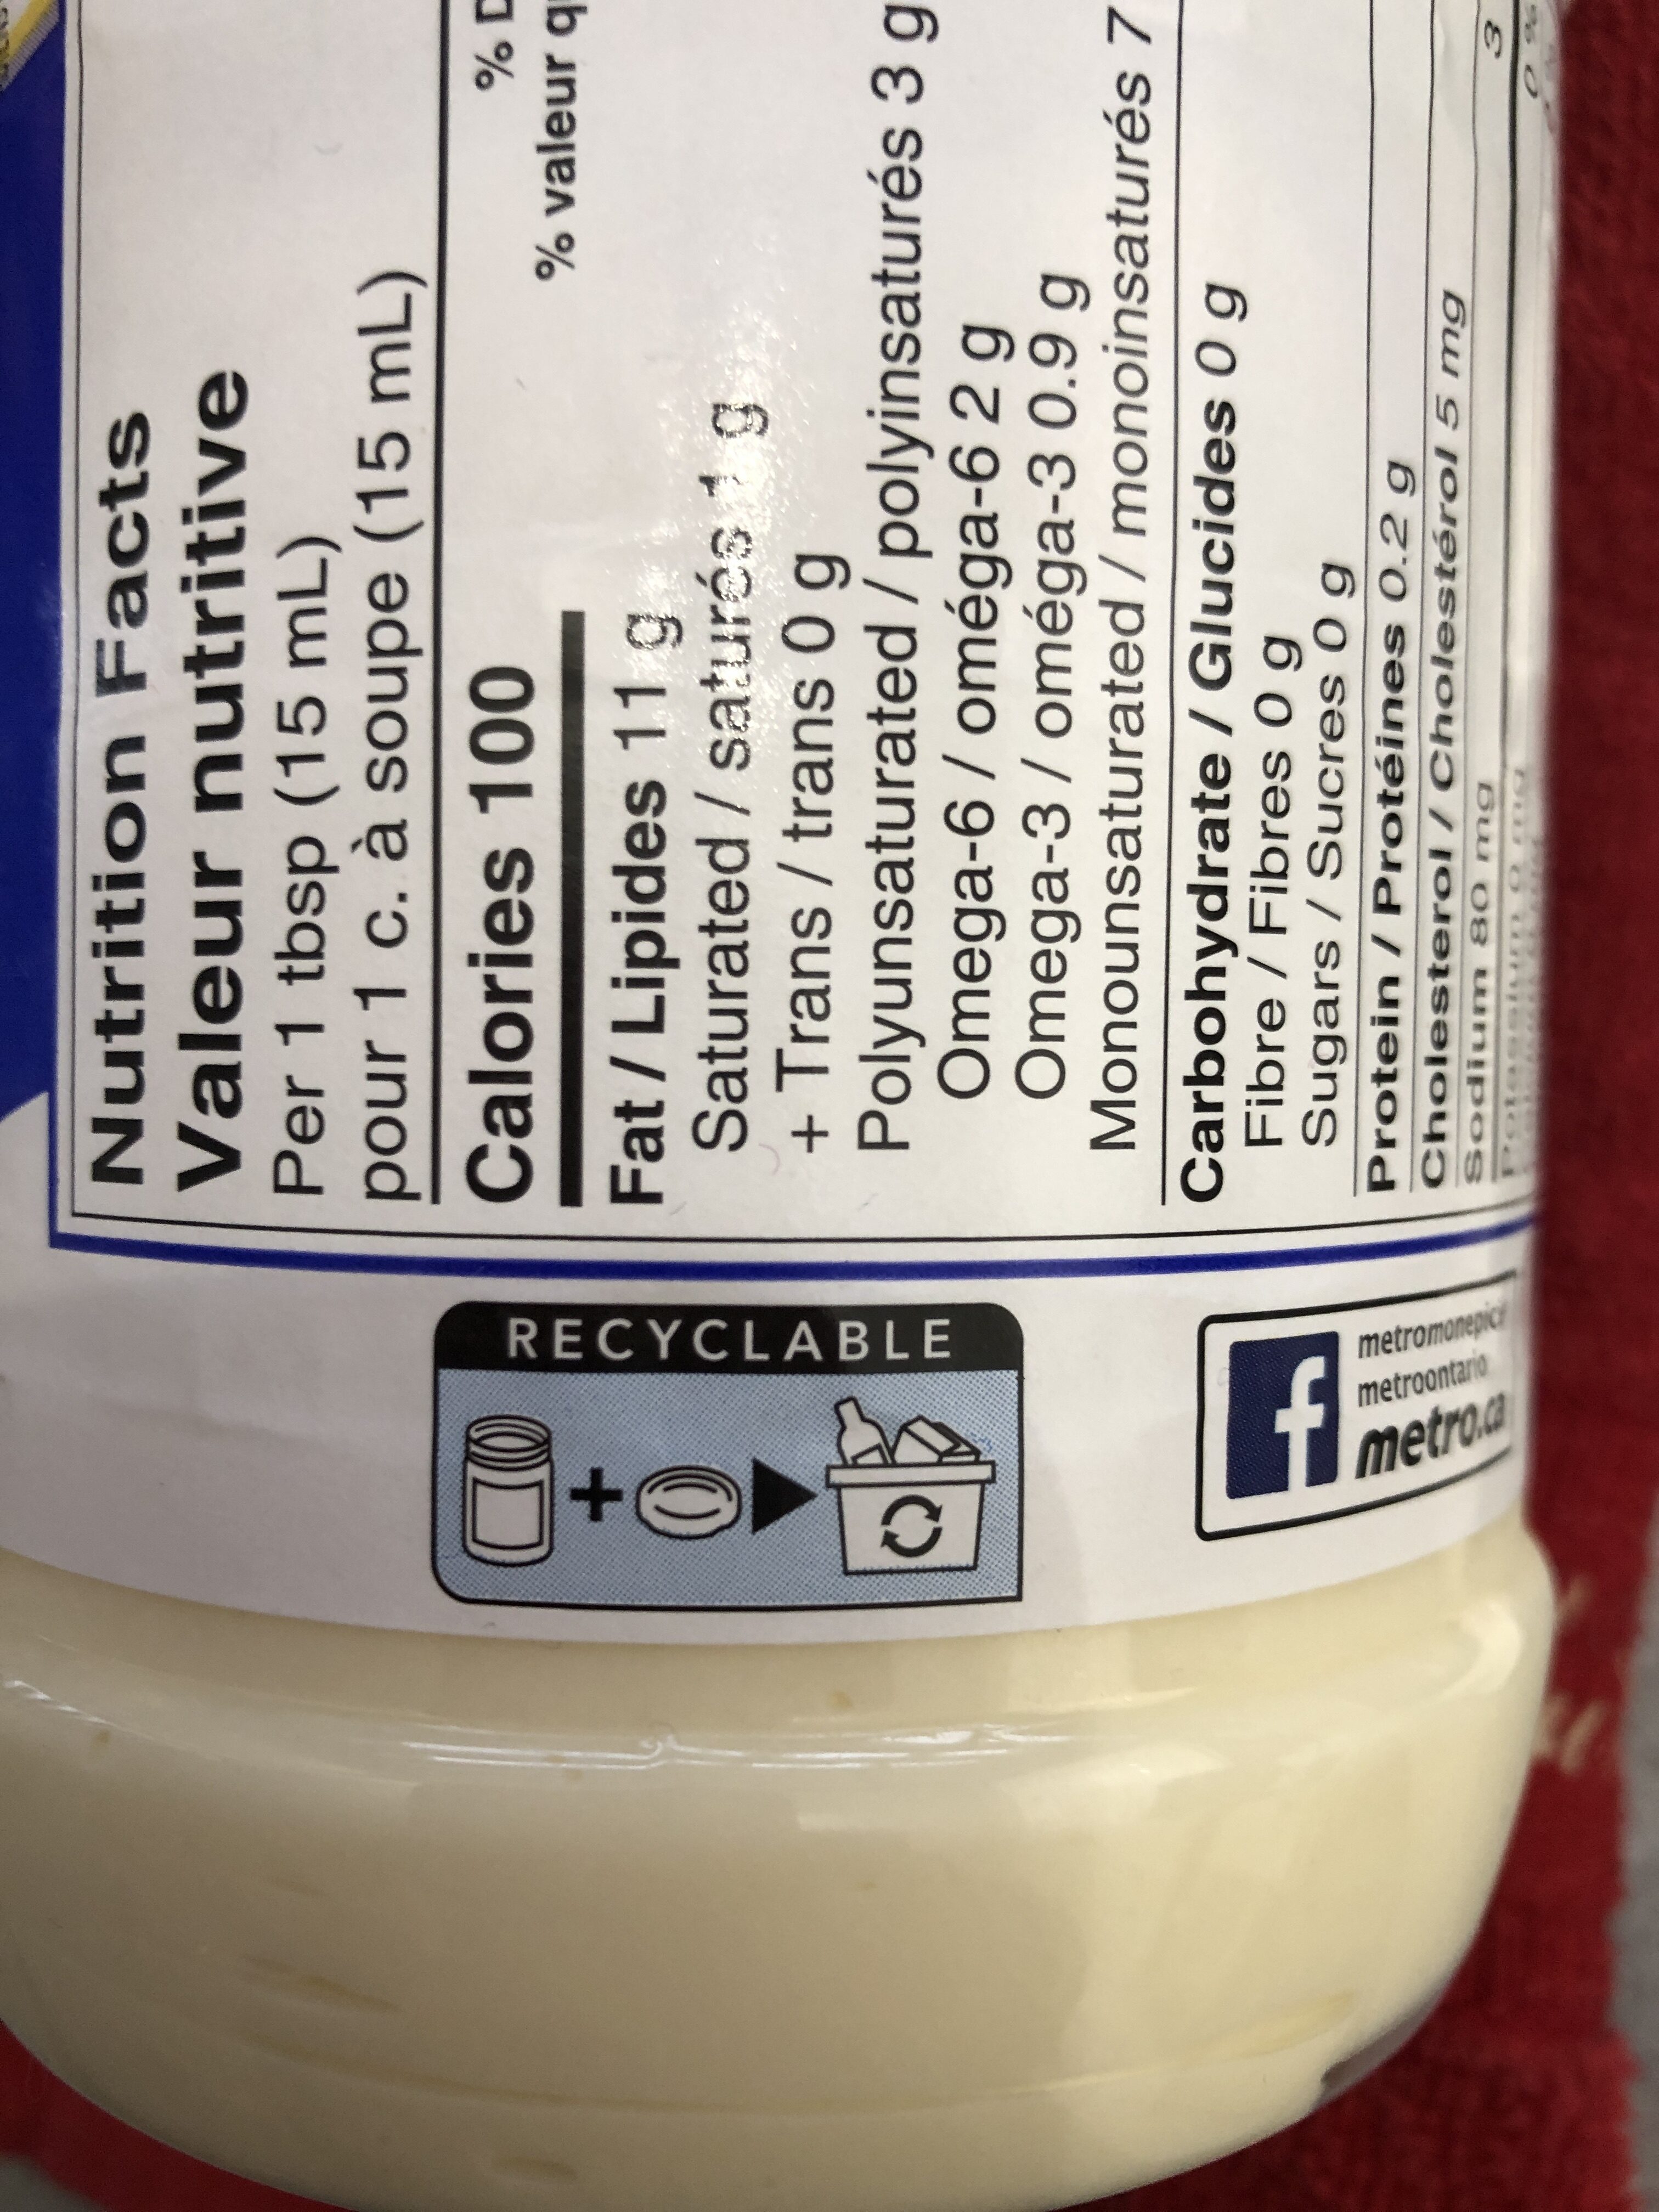 Mayo - Recycling instructions and/or packaging information